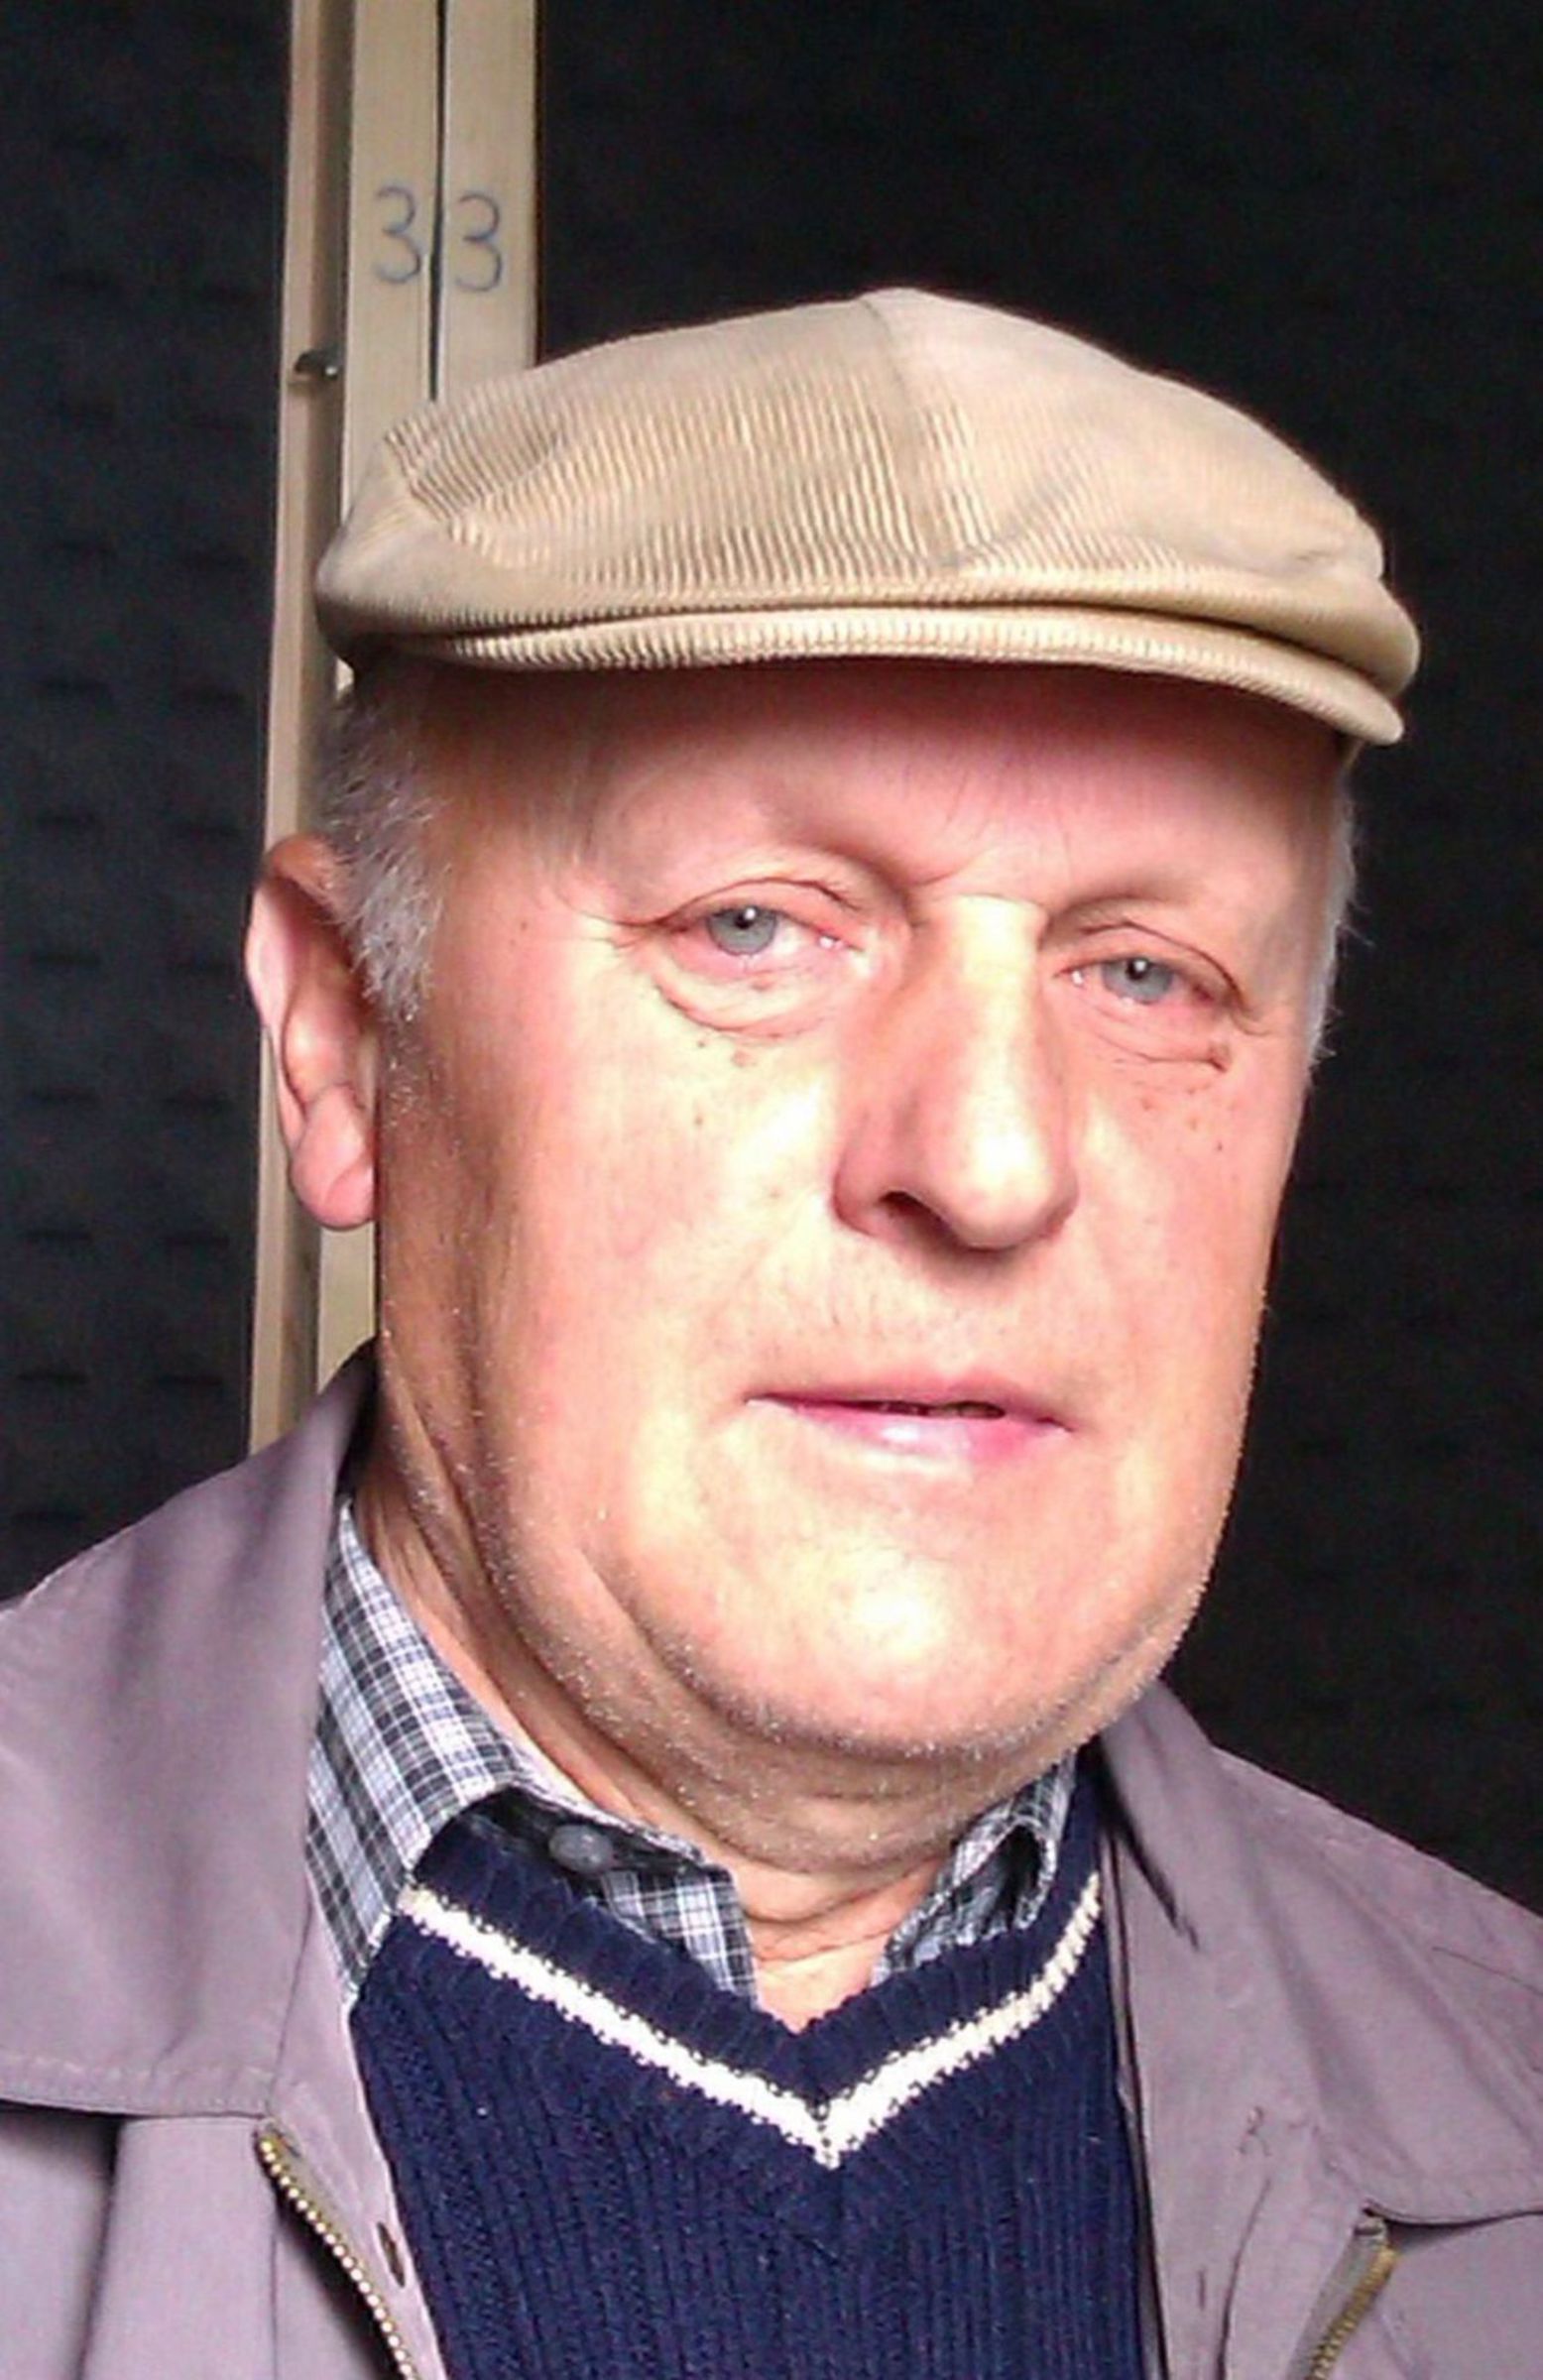 Jaroslav Hrdina during the recording of the interview, 2014